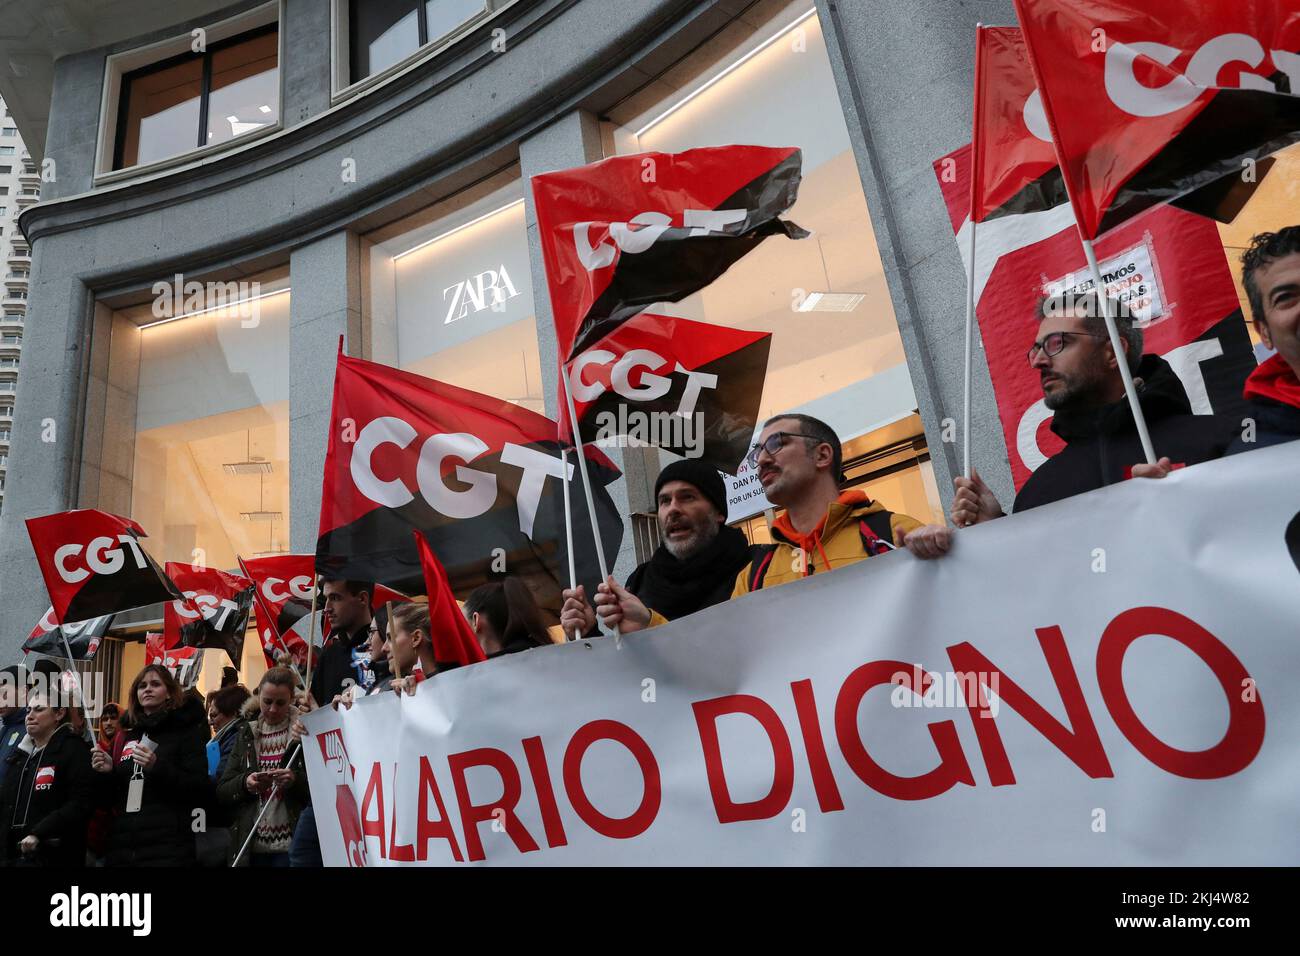 People hold flags from Spain's CGT labour union as they protest outside a  Zara clothing store, an Inditex brand, for an increase in salaries amidst  inflation hikes, in Madrid, Spain, November 24,